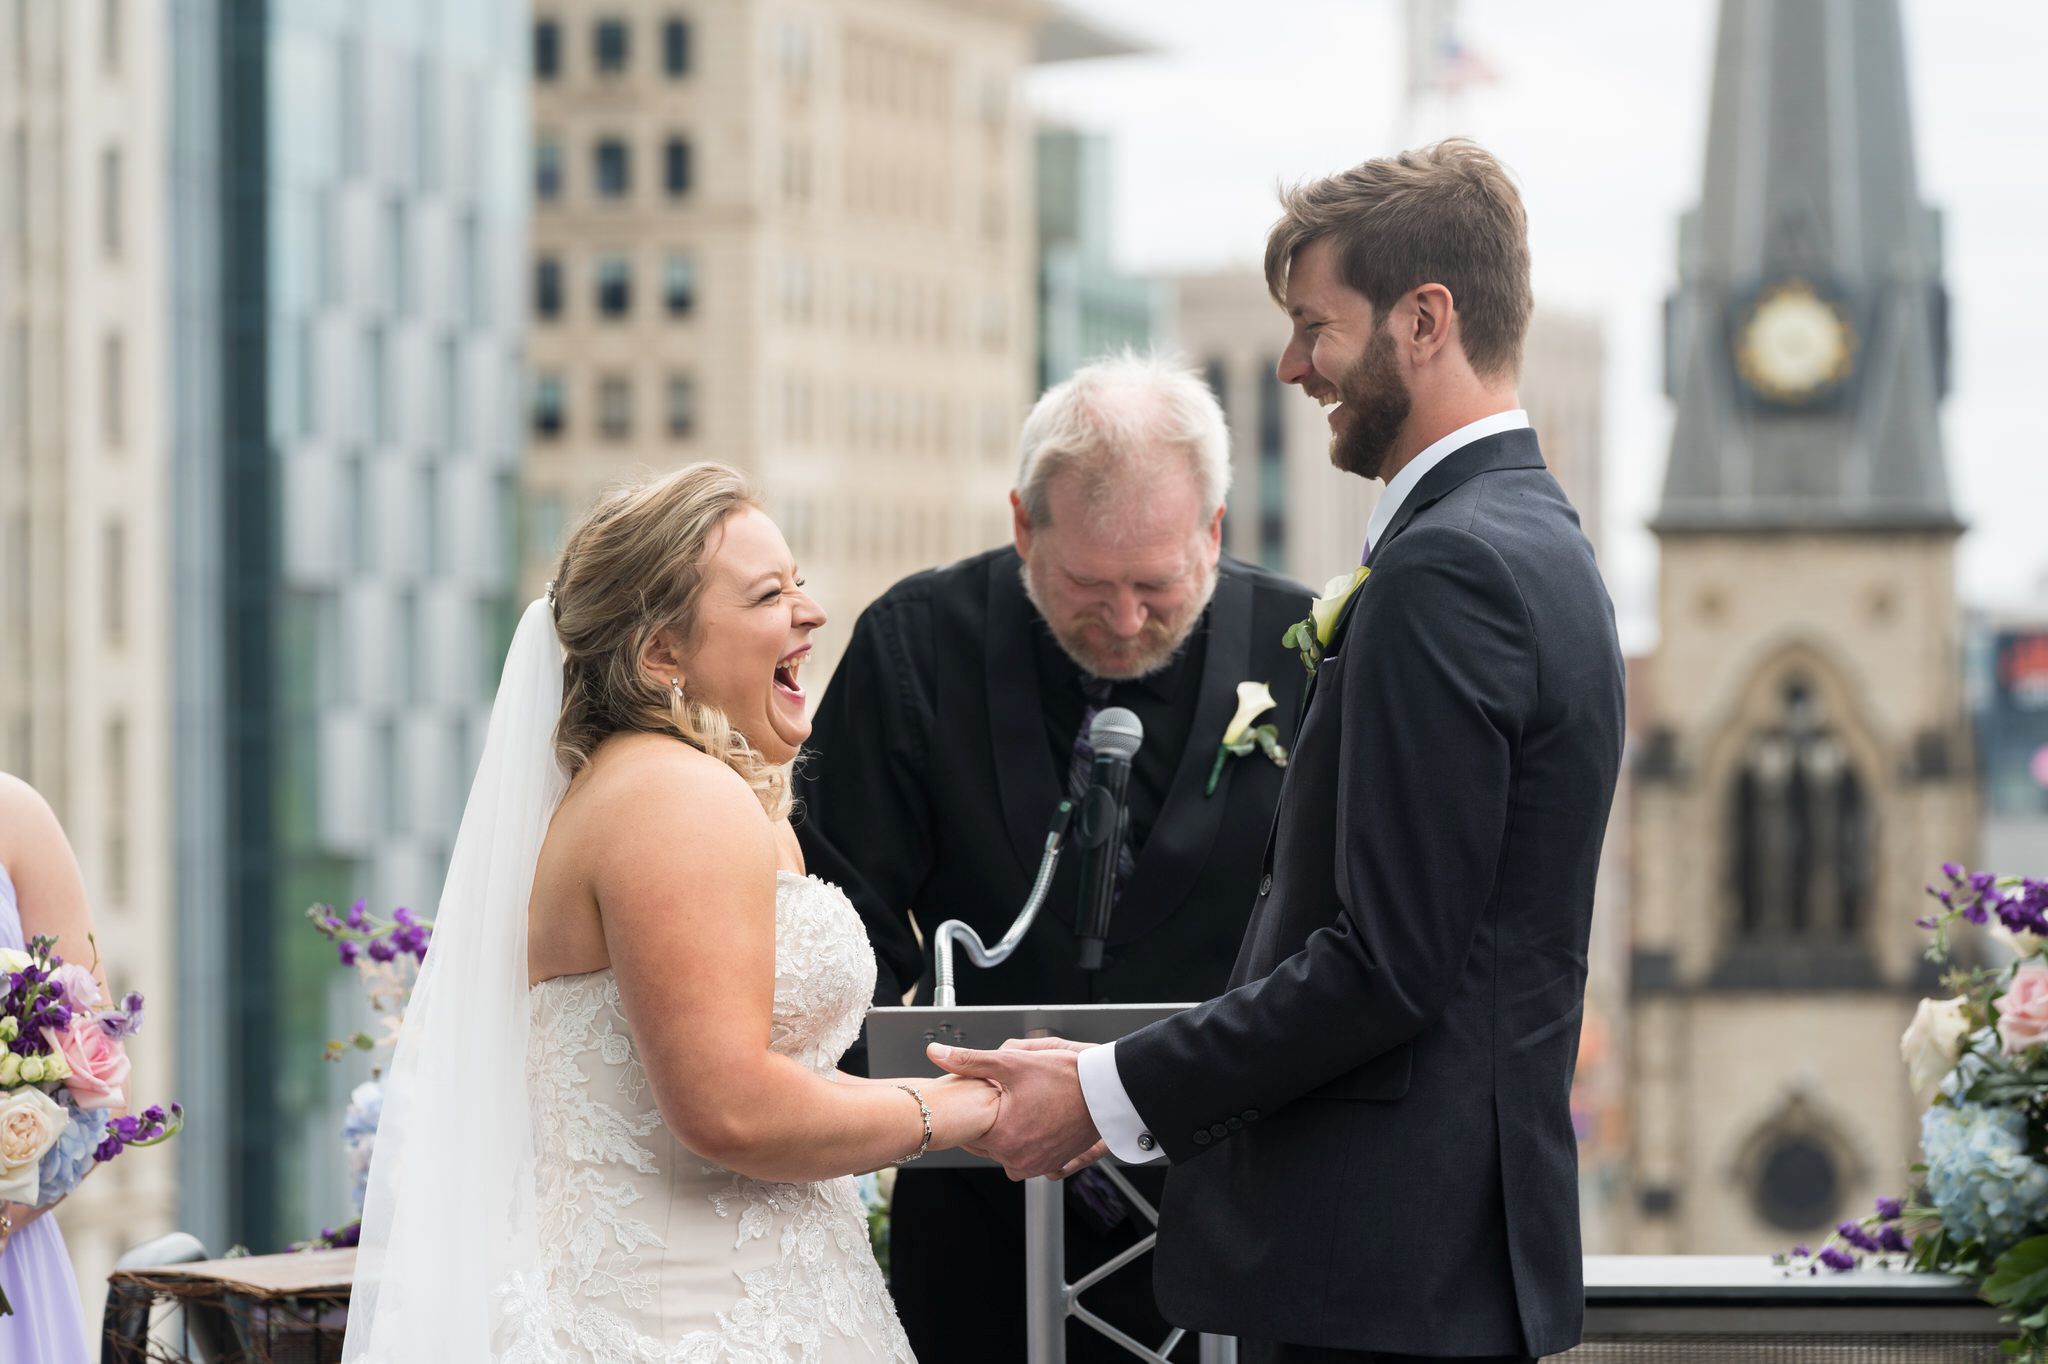 Bride and groom share rings and vows at their Madison Building wedding.